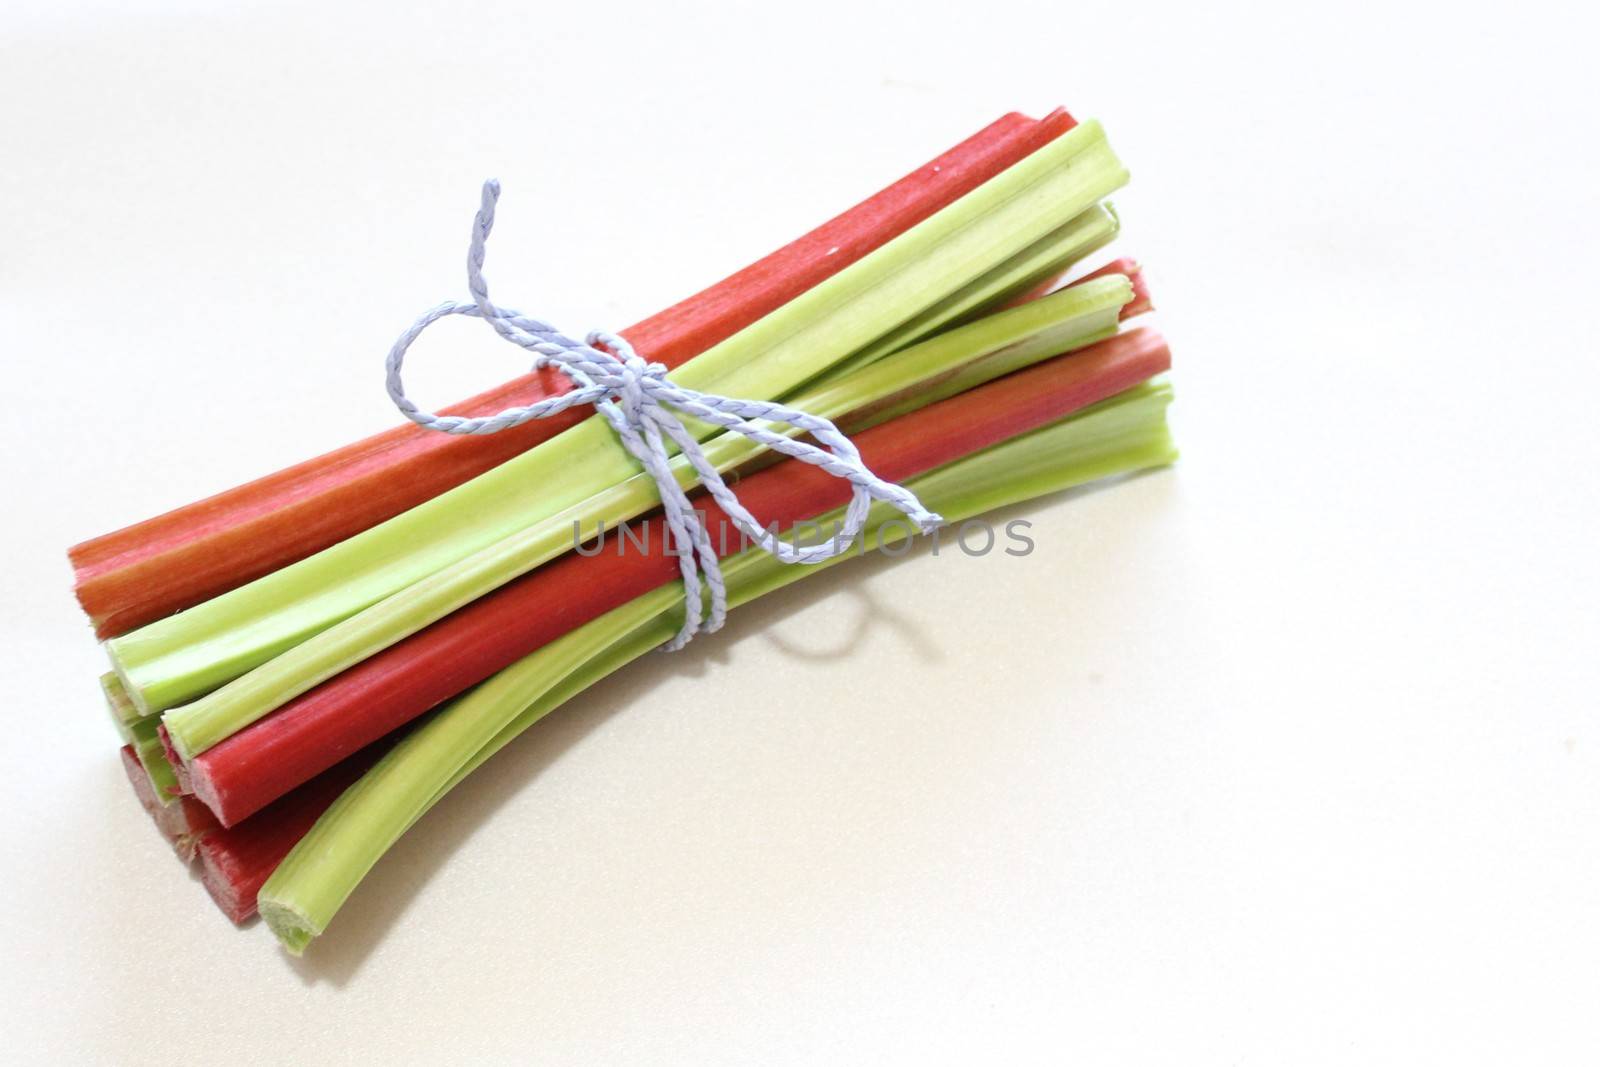 The picture shows colorful delicious rhubarb on a white background.